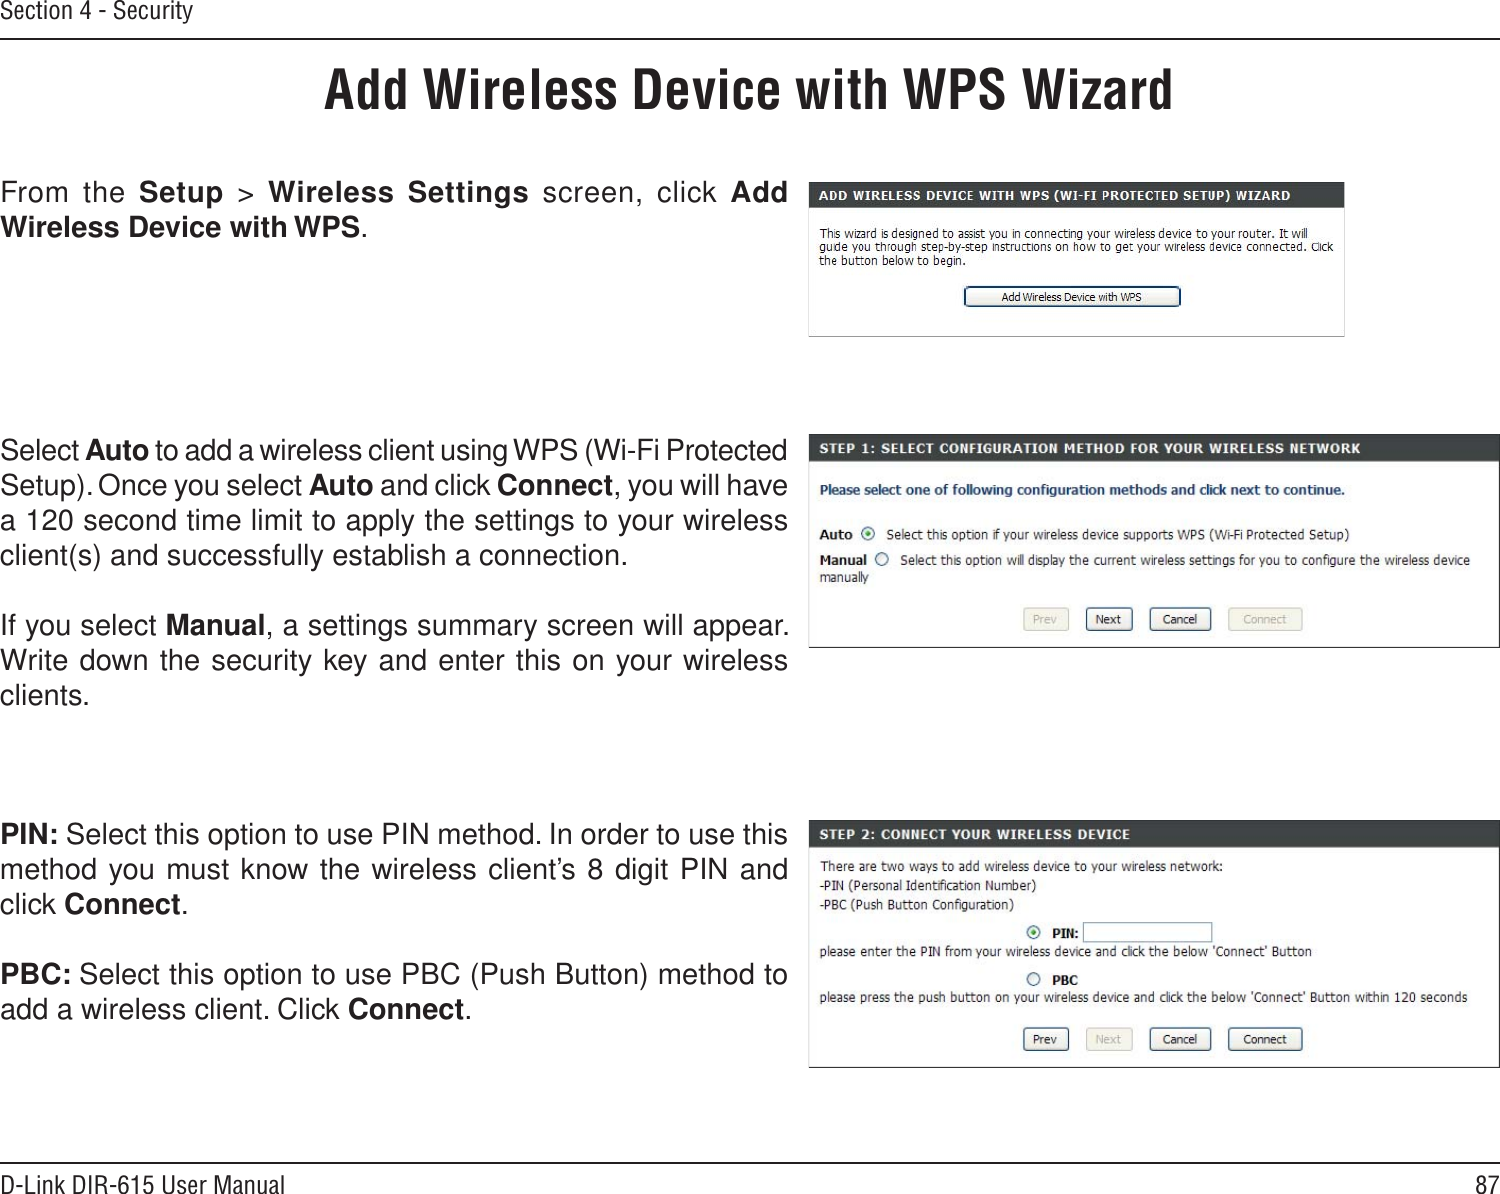 87D-Link DIR-615 User ManualSection 4 - SecurityFrom the Setup  &gt;  Wireless Settings screen, click Add Wireless Device with WPS.Add Wireless Device with WPS WizardPIN: Select this option to use PIN method. In order to use this method you must know the wireless client’s 8 digit PIN and click Connect.PBC: Select this option to use PBC (Push Button) method to add a wireless client. Click Connect.Select Auto to add a wireless client using WPS (Wi-Fi Protected Setup). Once you select Auto and click Connect, you will have a 120 second time limit to apply the settings to your wireless client(s) and successfully establish a connection. If you select Manual, a settings summary screen will appear. Write down the security key and enter this on your wireless clients. 